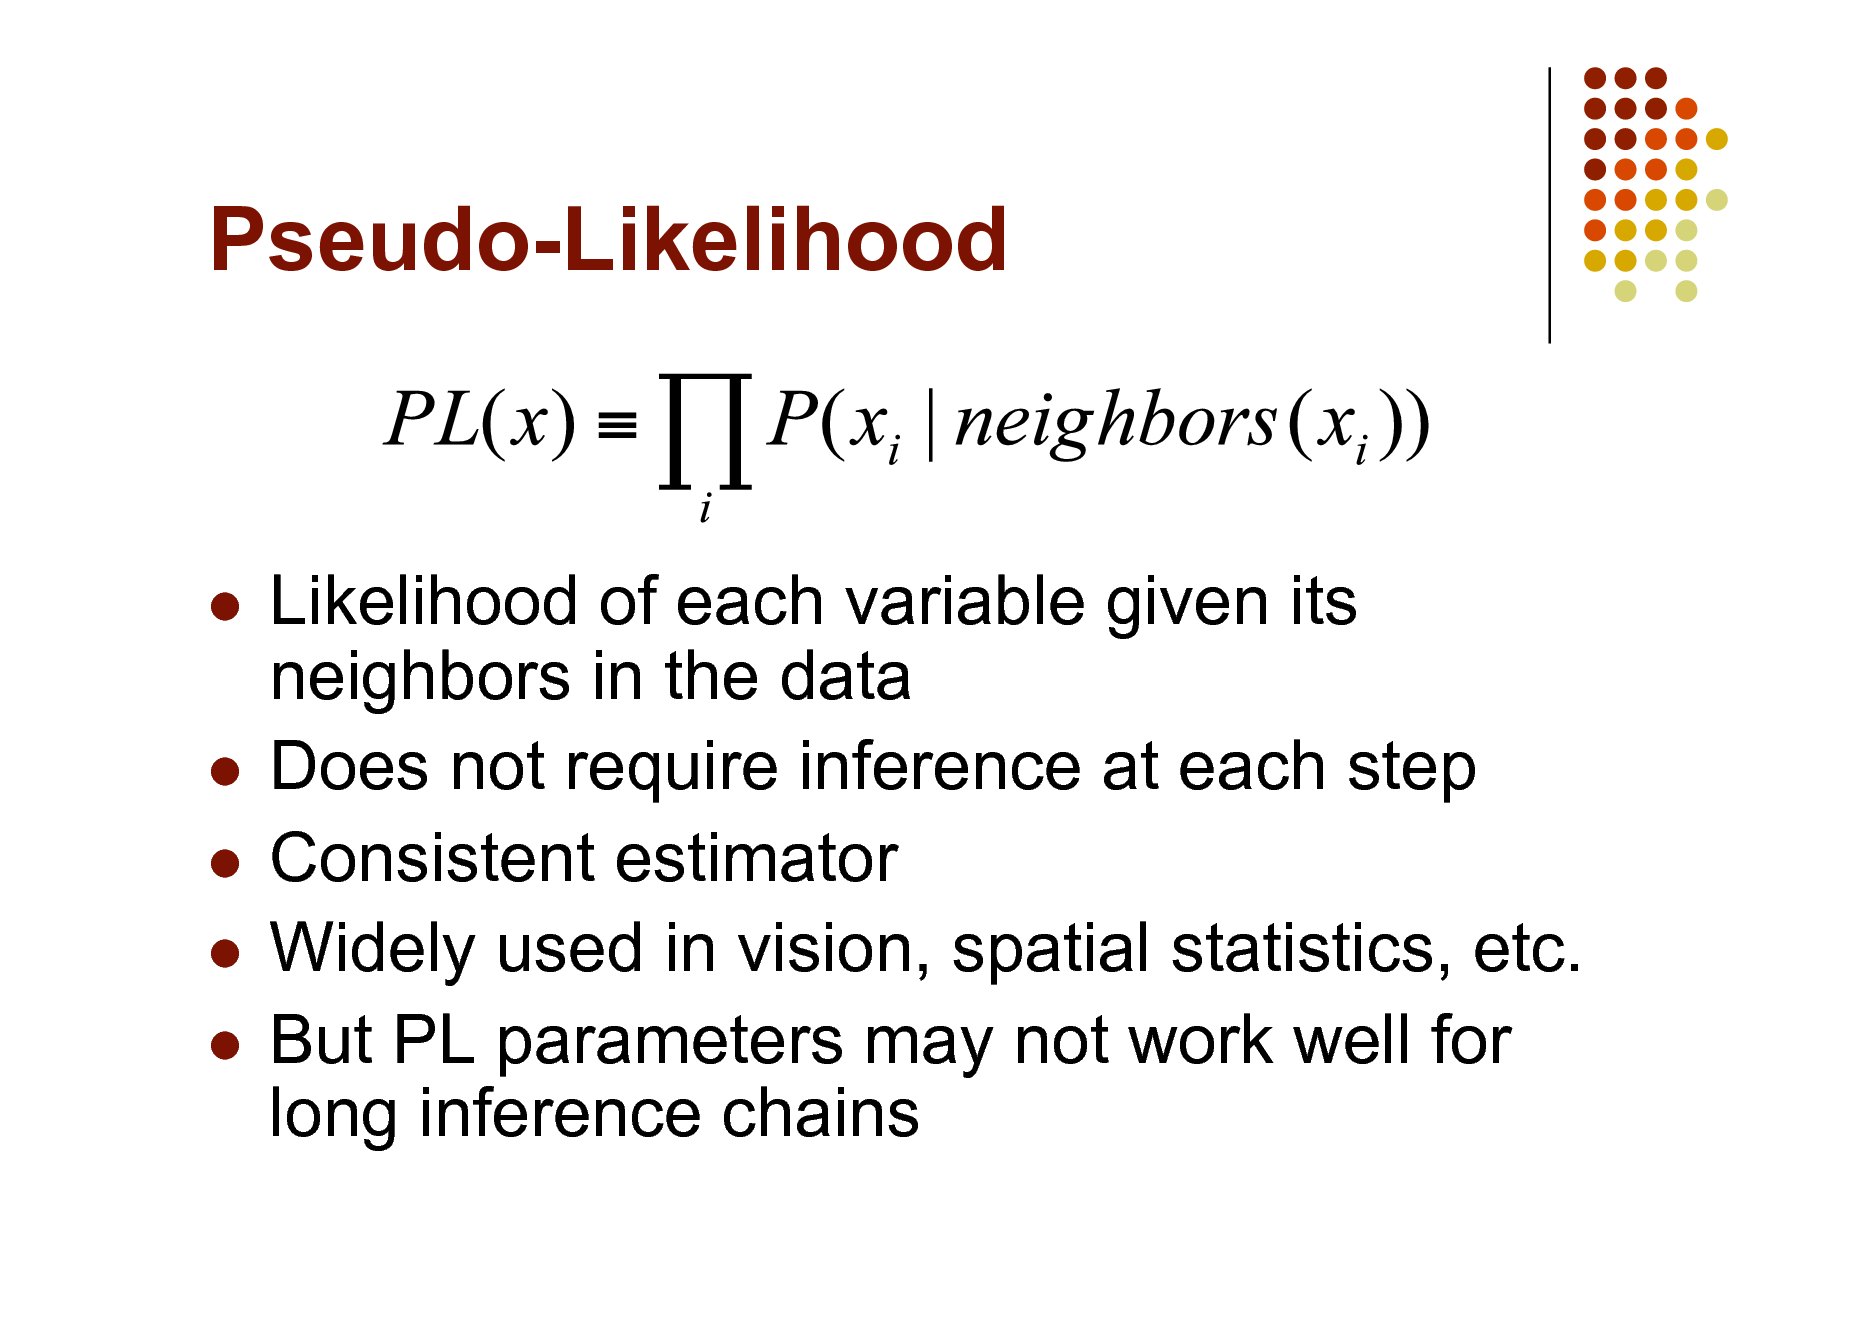 Slide: Pseudo-Likelihood

Likelihood of each variable given its neighbors in the data  Does not require inference at each step  Consistent estimator  Widely used in vision, spatial statistics, etc.  But PL parameters may not work well for long inference chains


